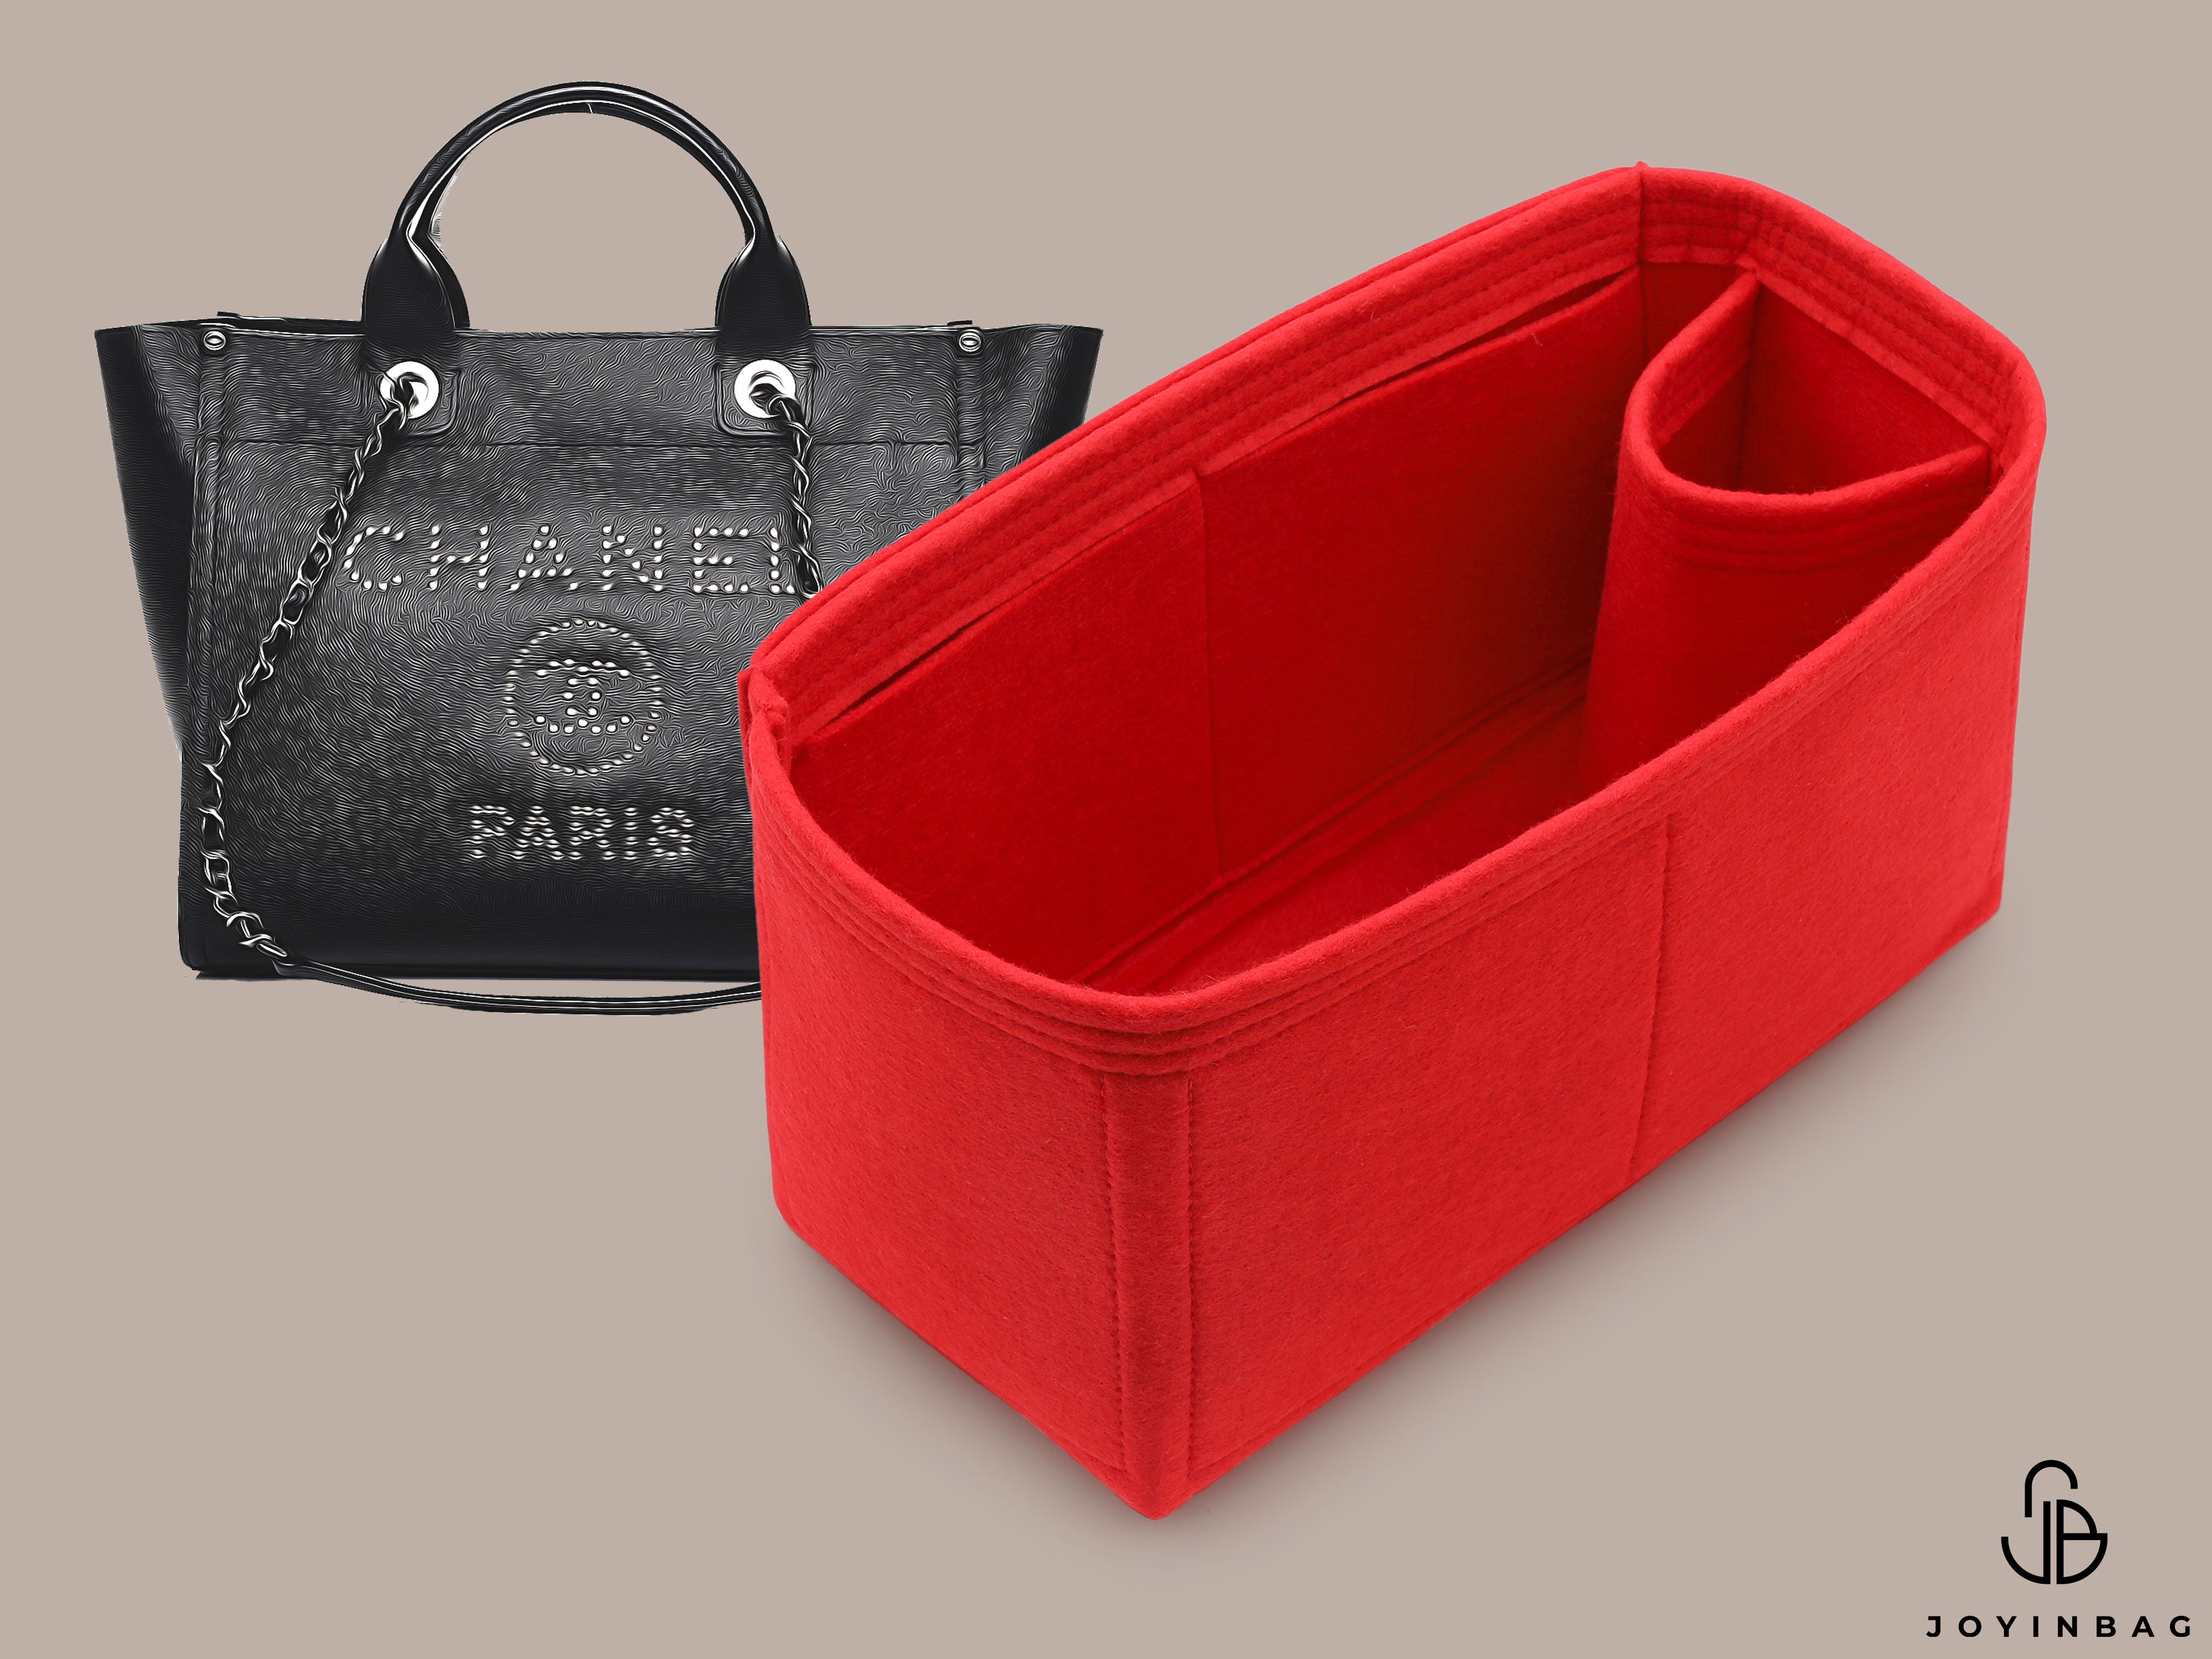 Chanel Deauville Leather Tote Bag Organizer